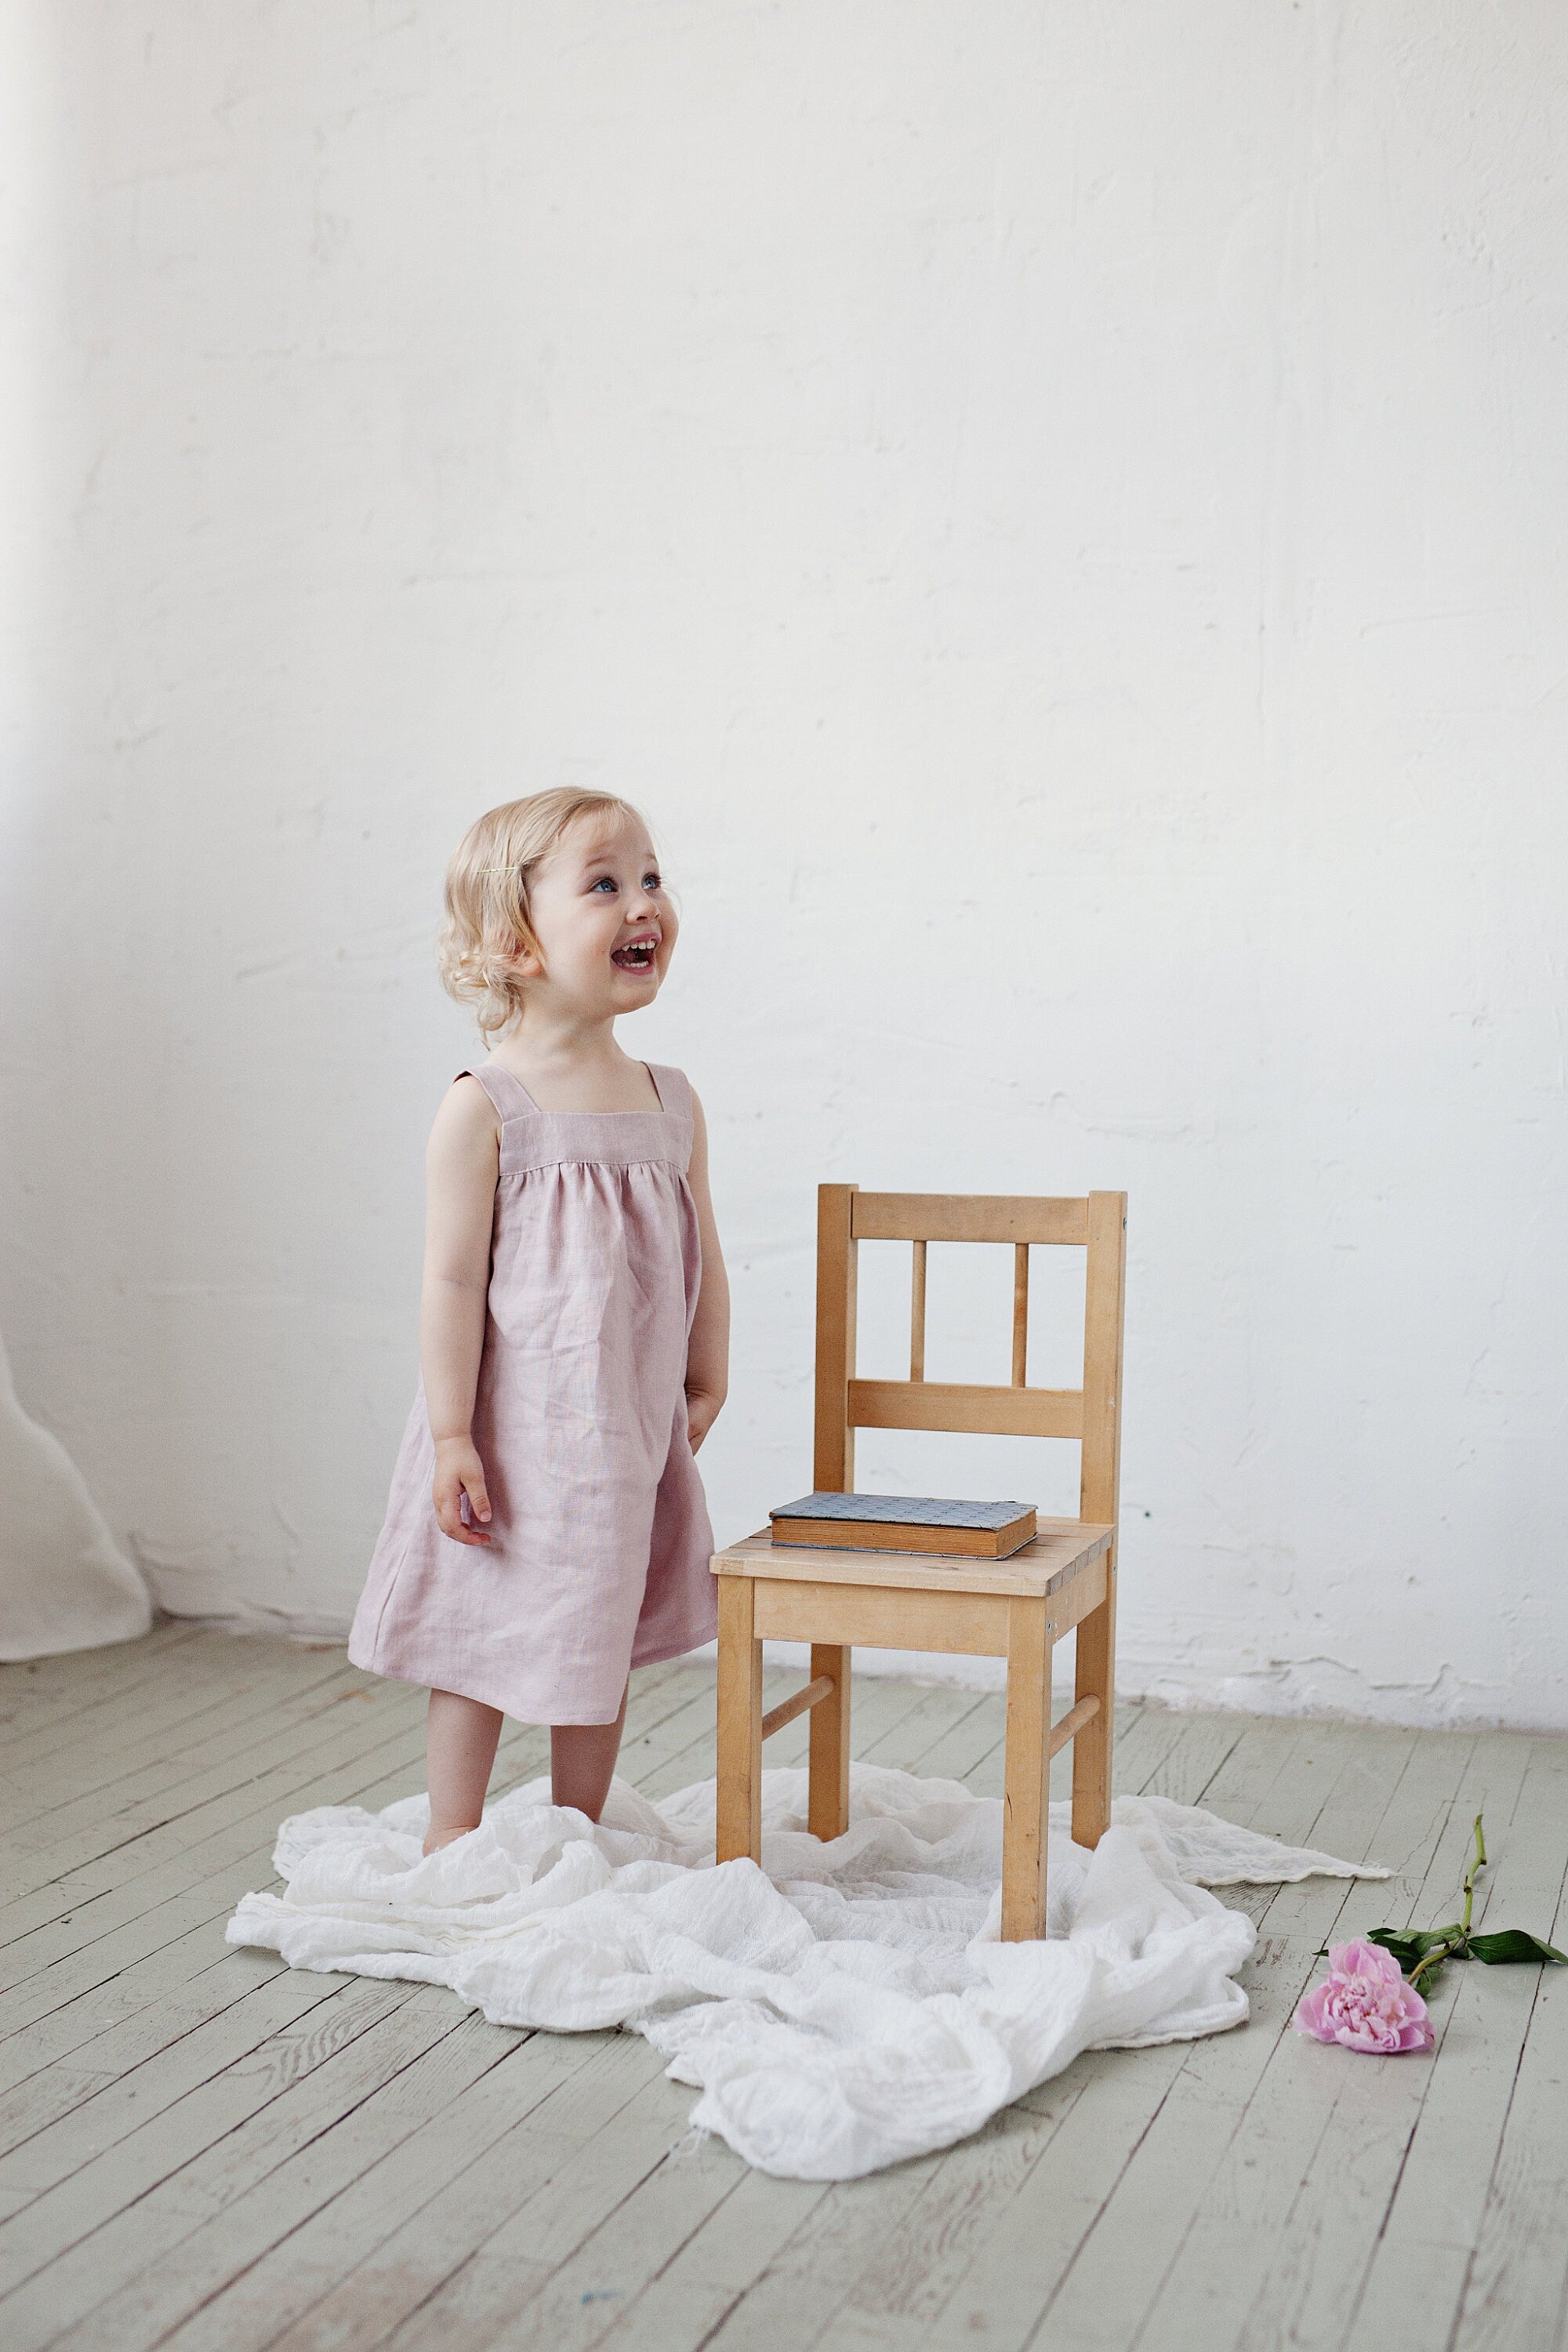 Baby Pink June Dress, Size 5-6 years